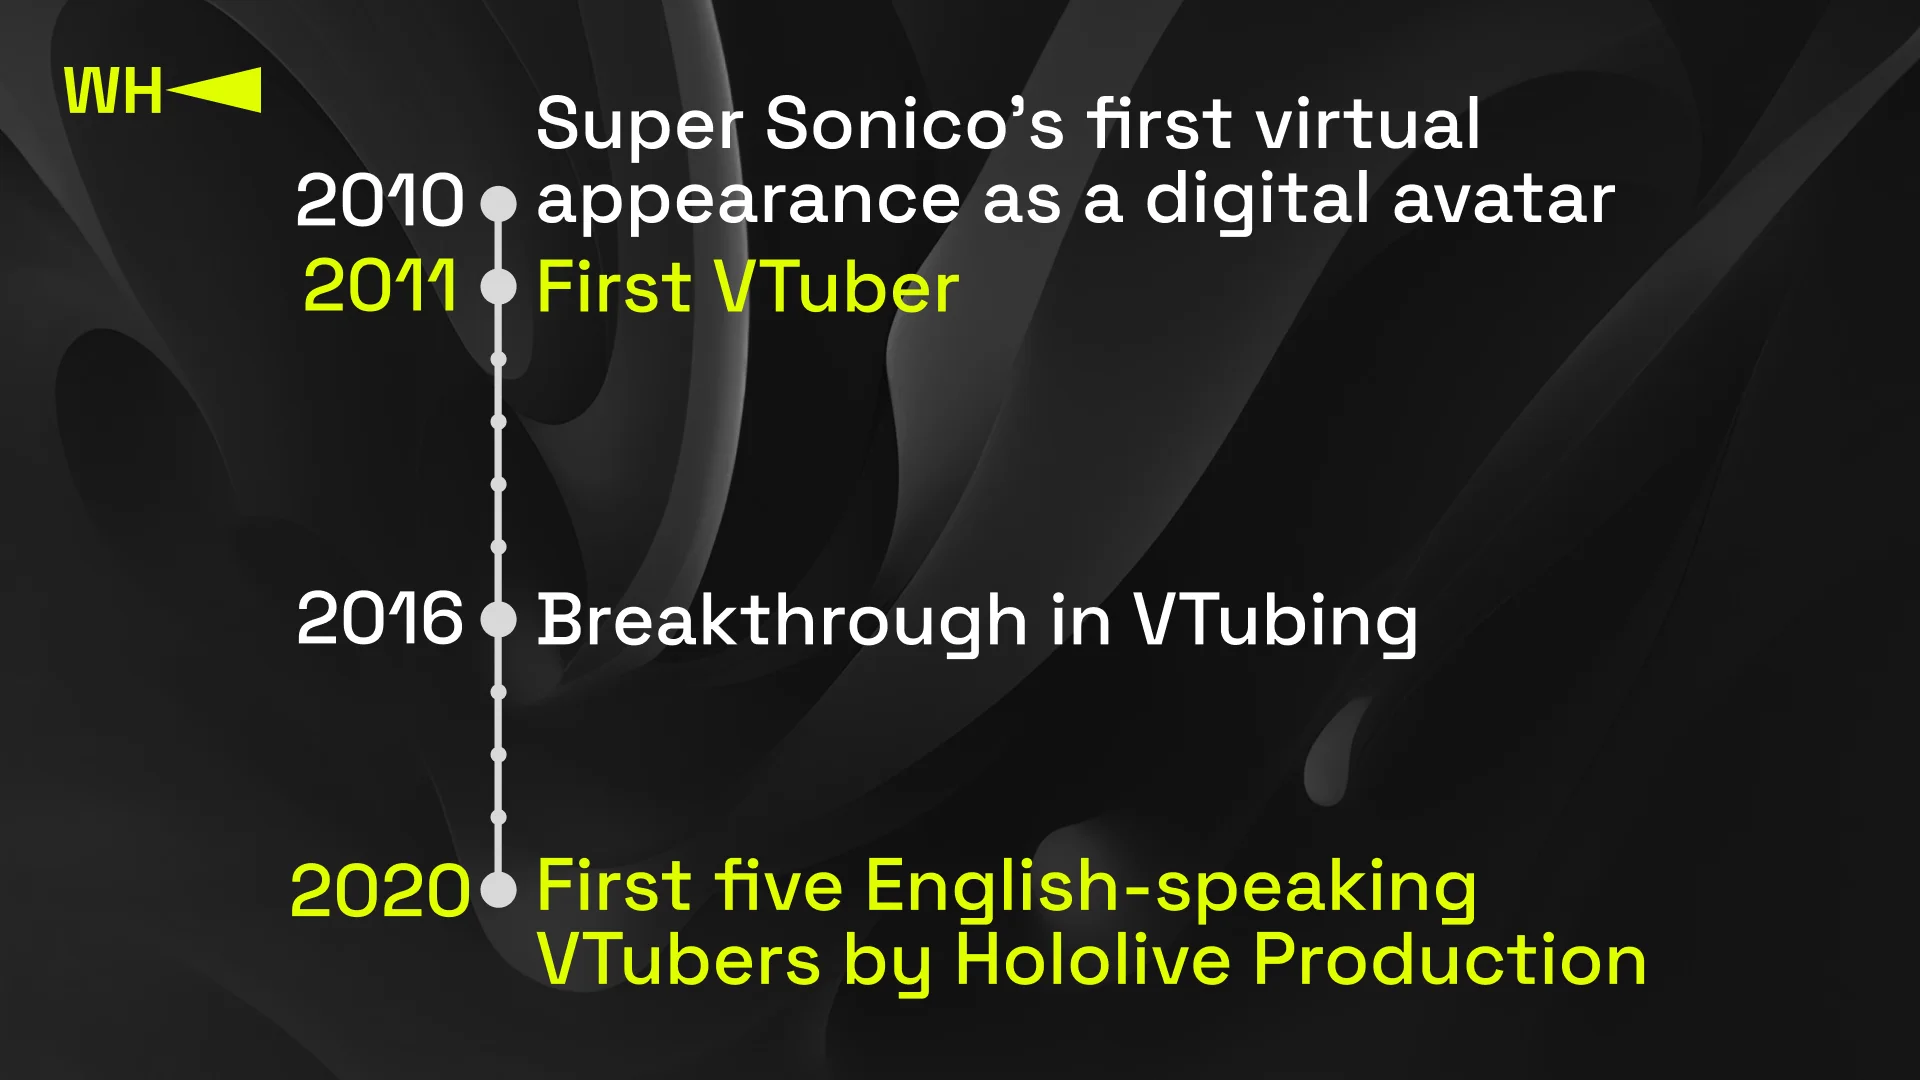 Who was the first VTuber? Credit: WePlay Holding